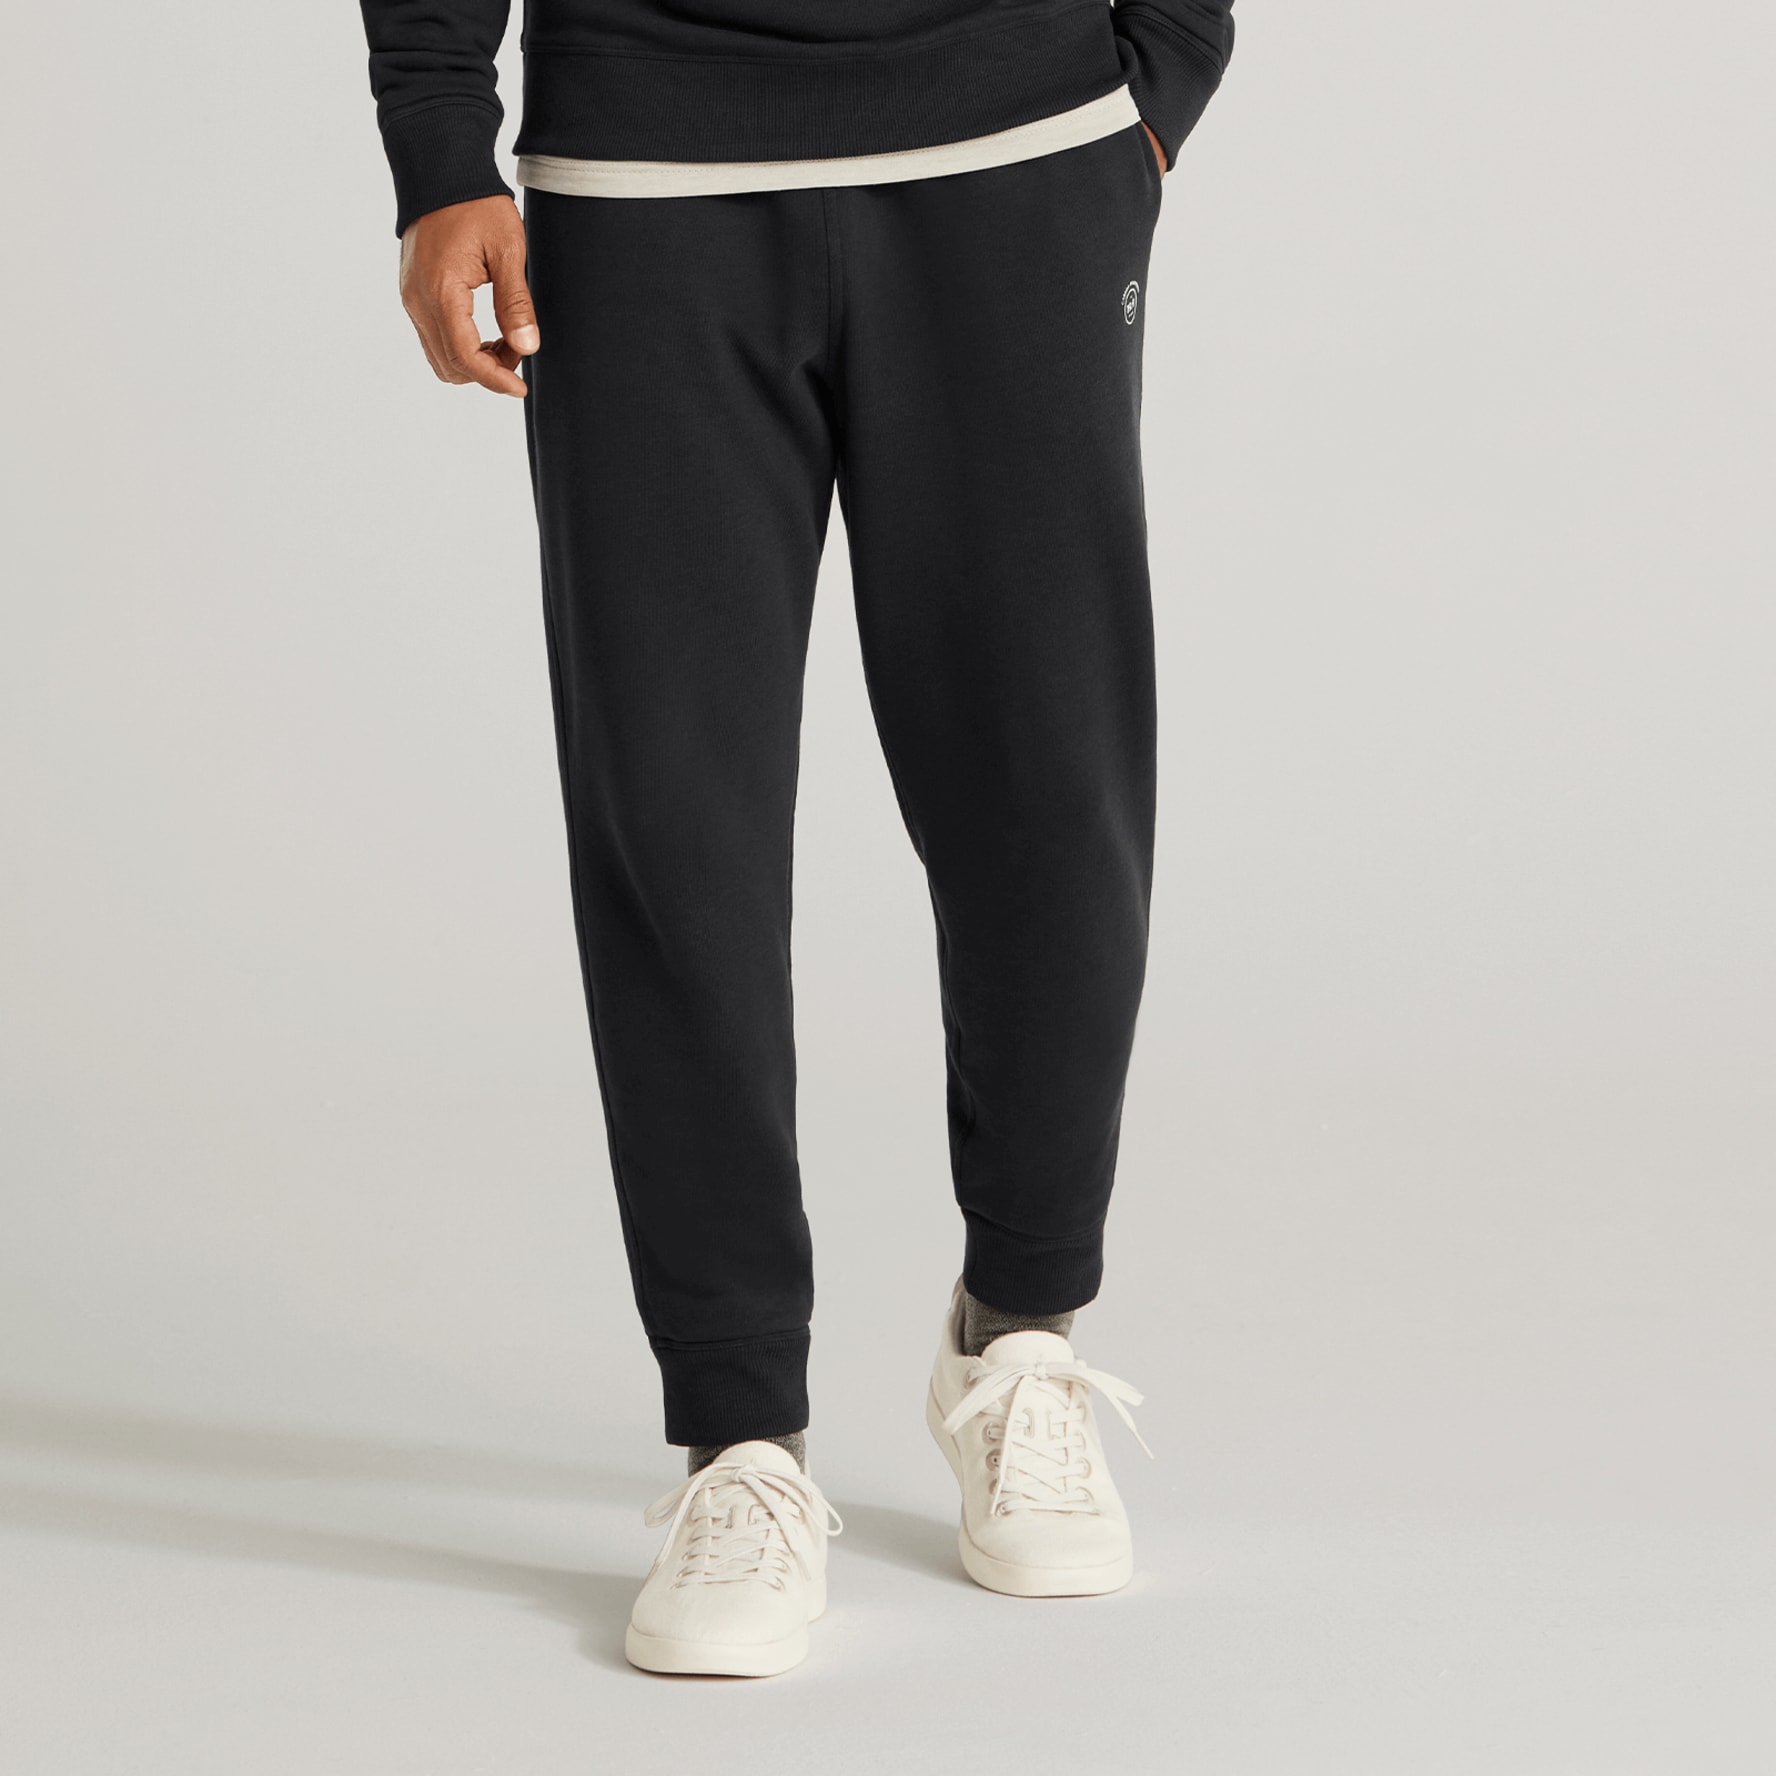 Give'r Yoggers Top-Quality Athleisure Pants